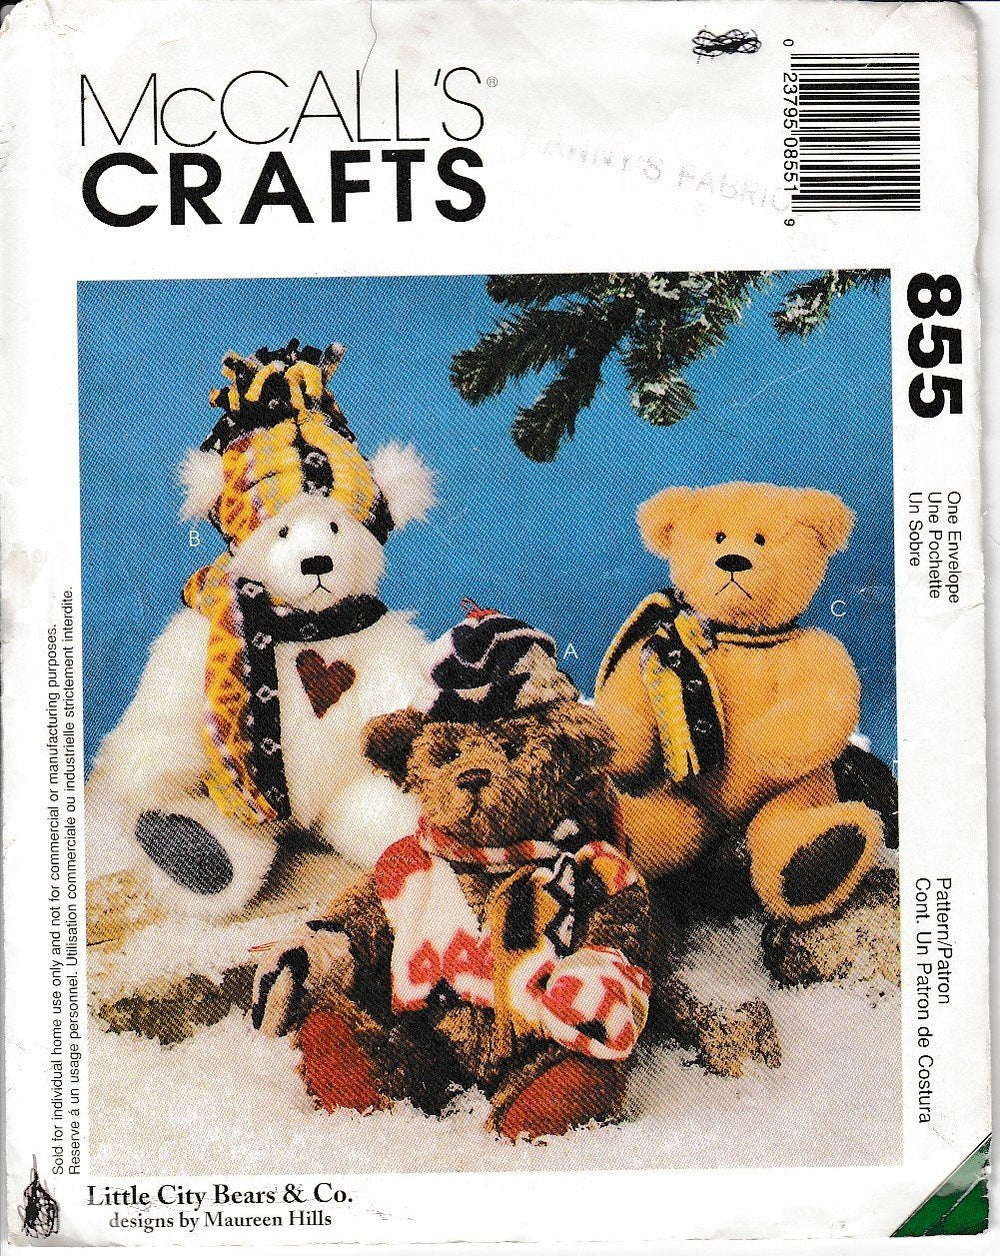 McCalls Crafts 855 / 9498 Stuffed Bears Sewing Pattern Christmas - VintageStitching - Vintage Sewing Patterns